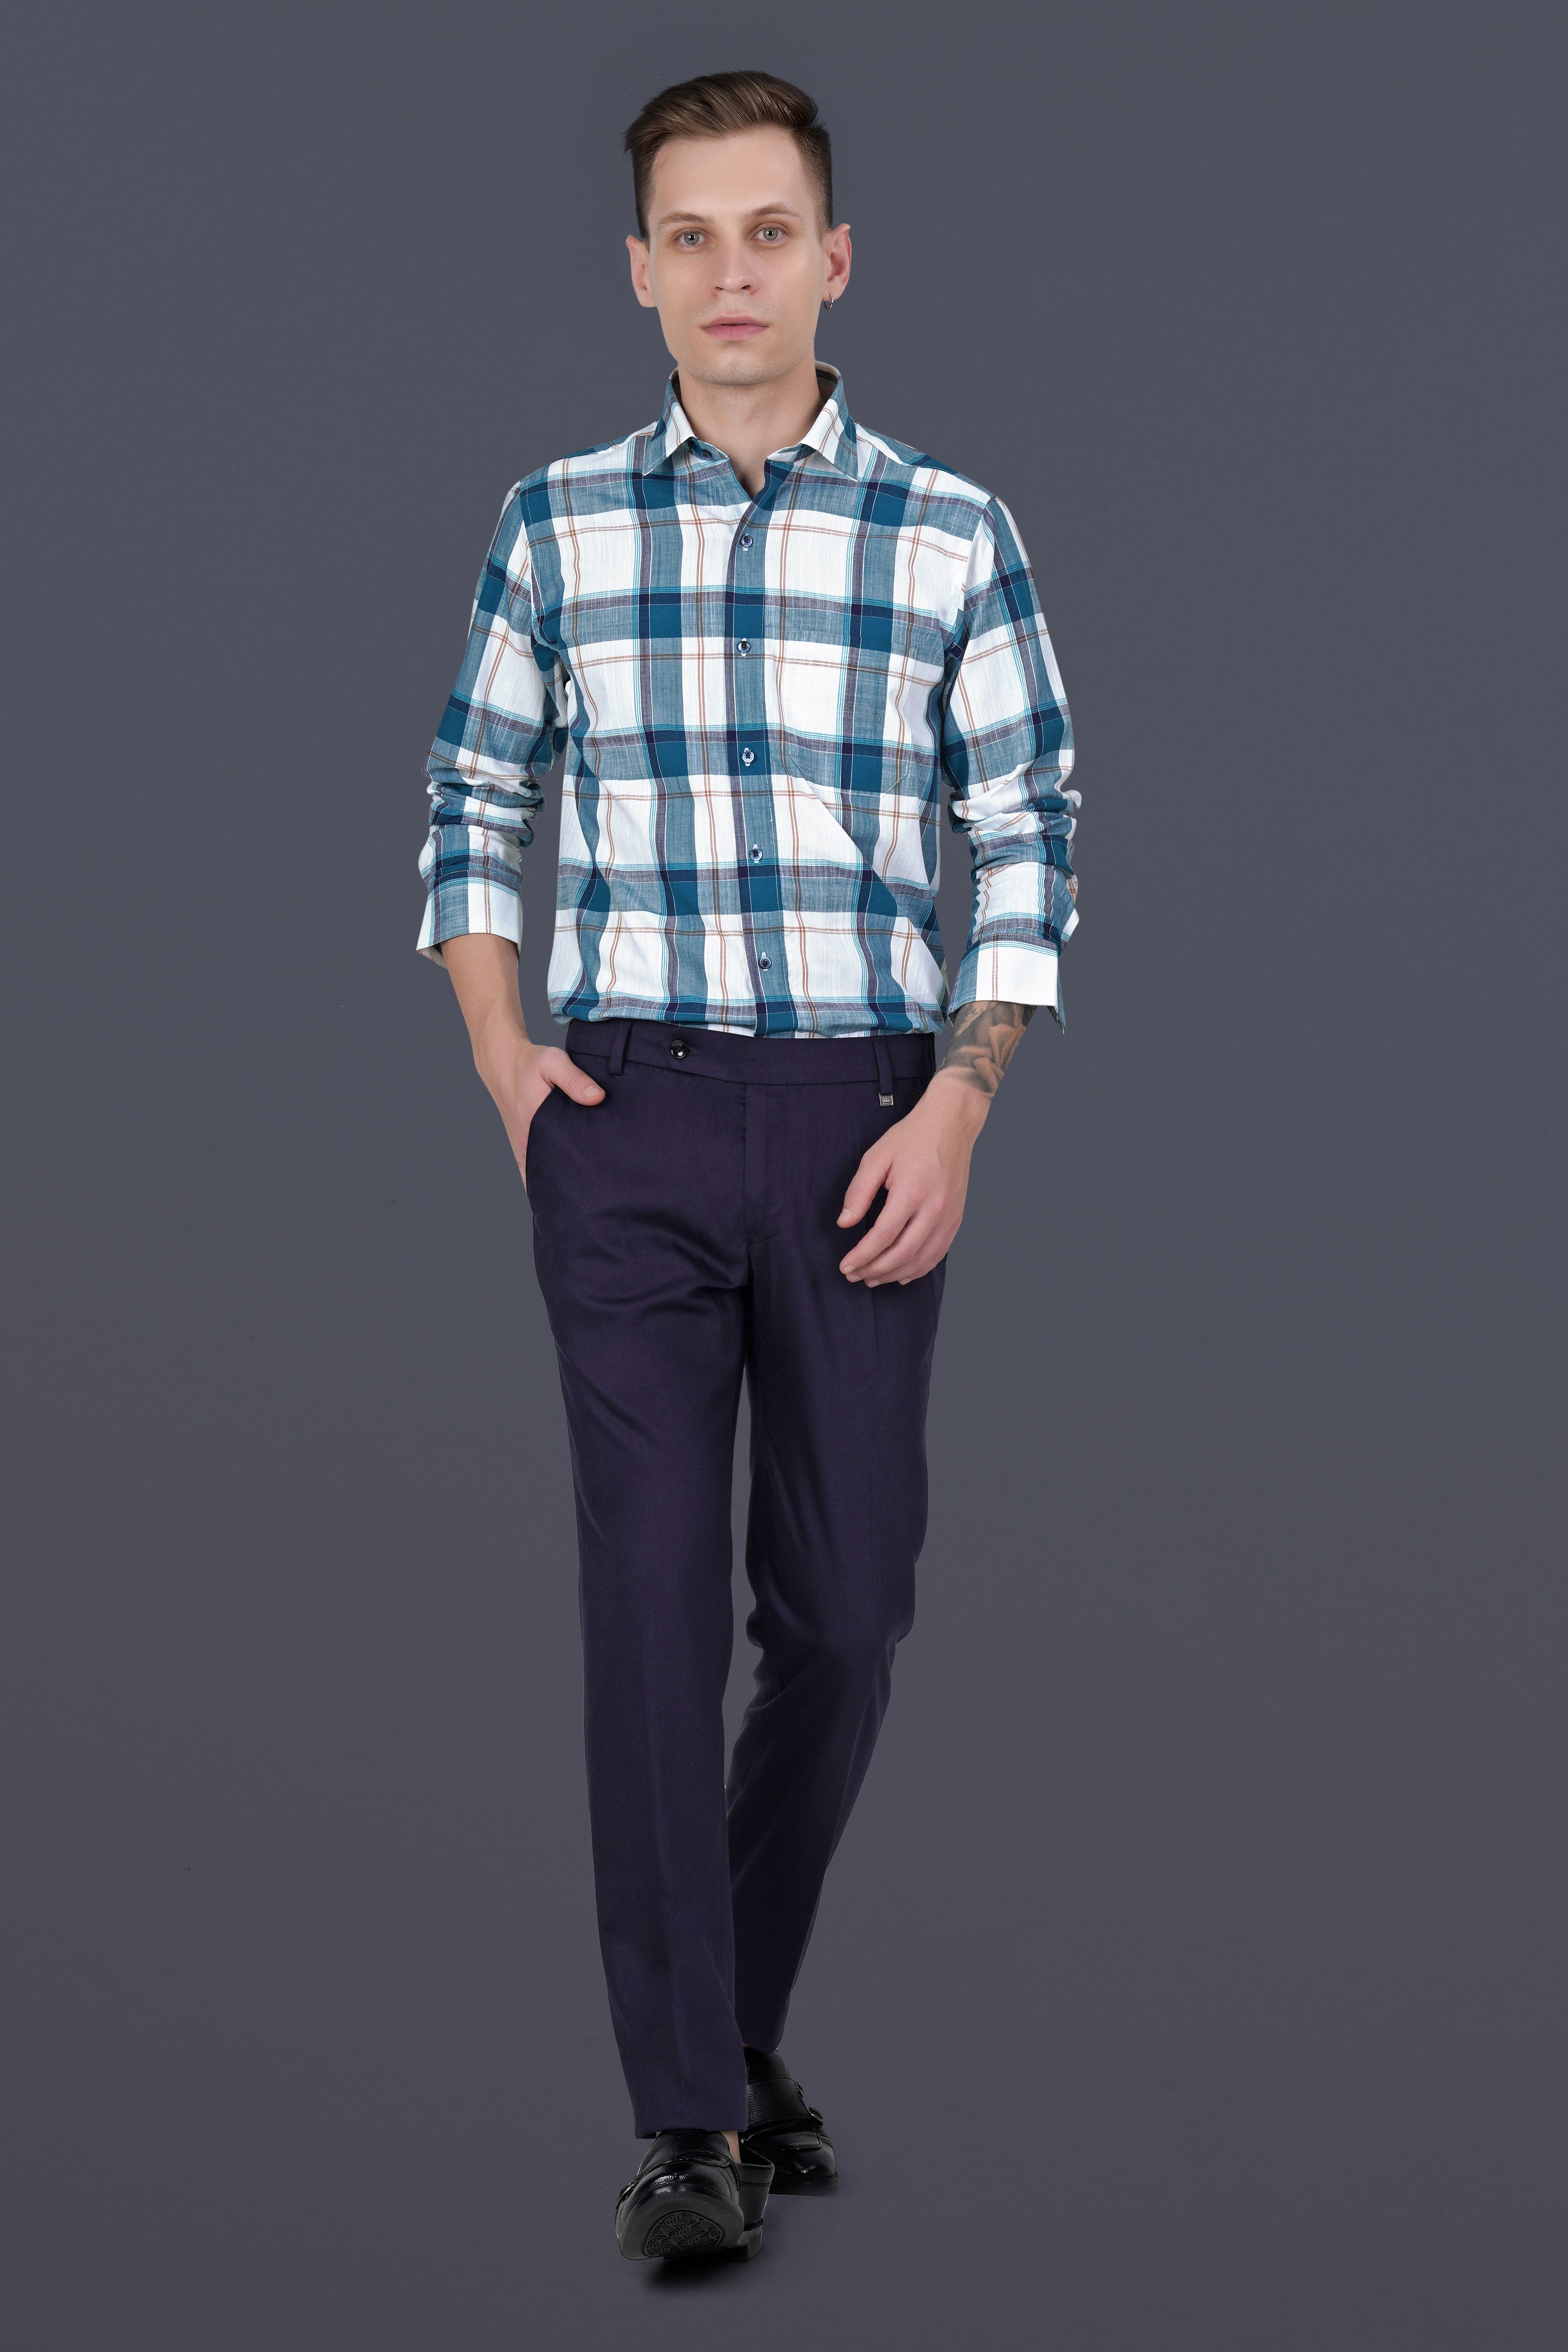 Bright White with Chathams Blue and Desert Brown Plaid Chambray Shirt